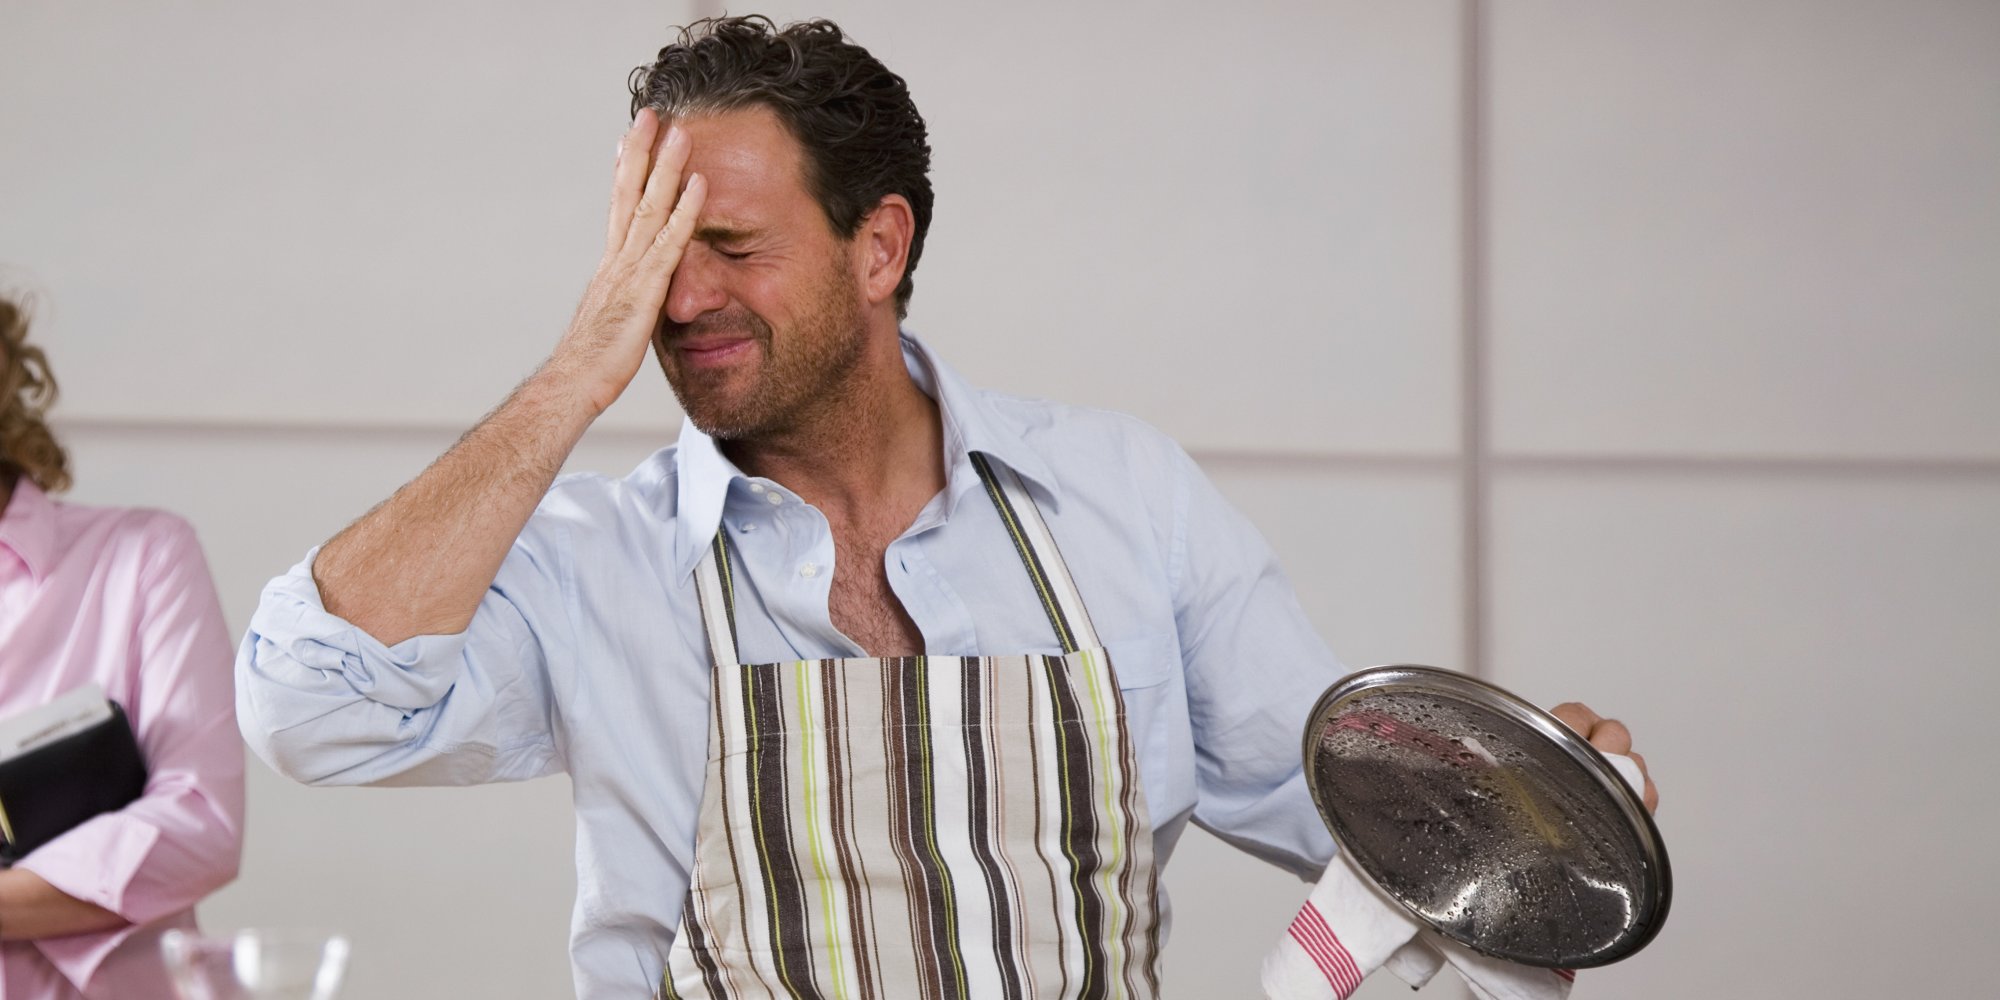 How I Learned to Cook for 50 by Being a Vegetarian Idiot | HuffPost Life